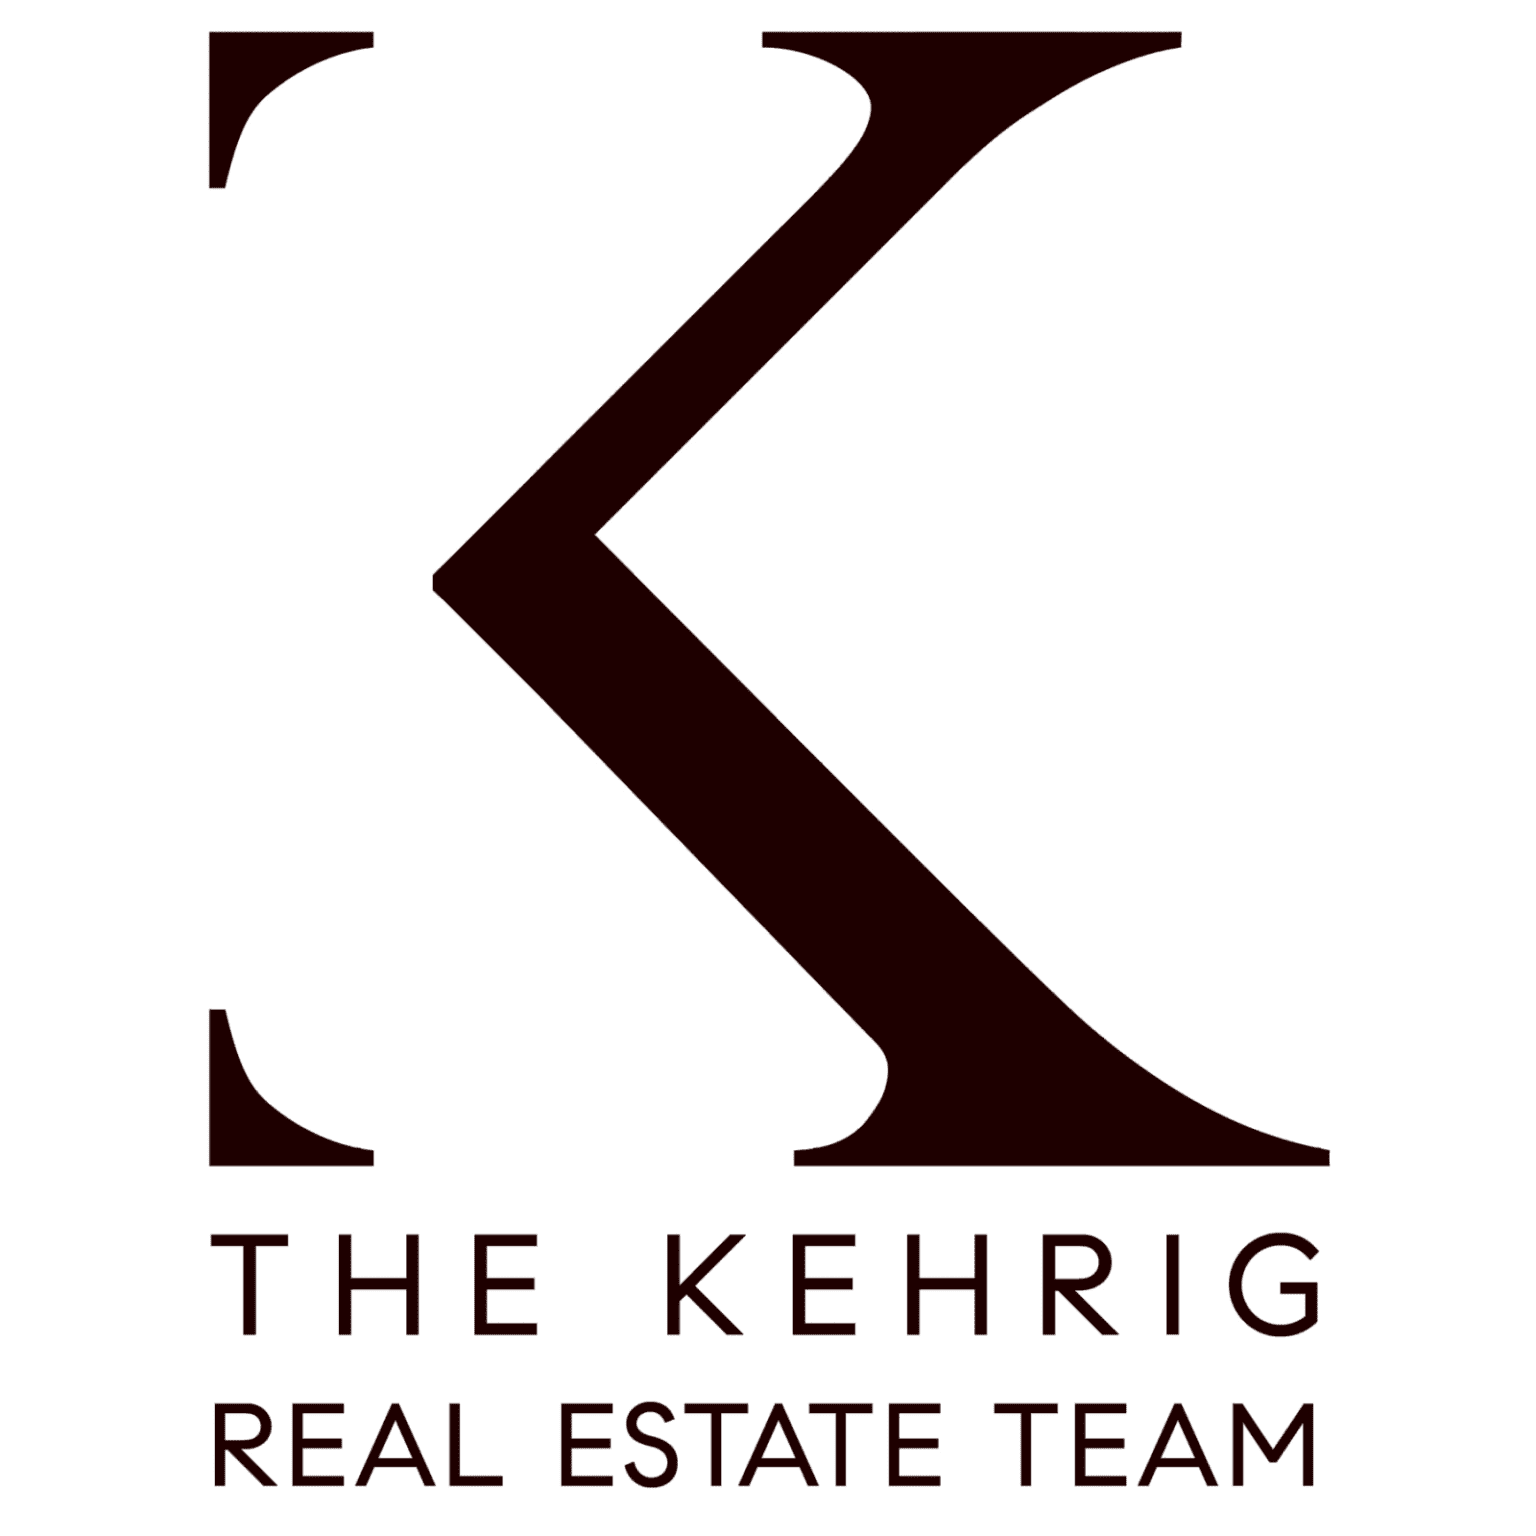 2020 New California Real Estate Laws The Kehrig Real Estate Team